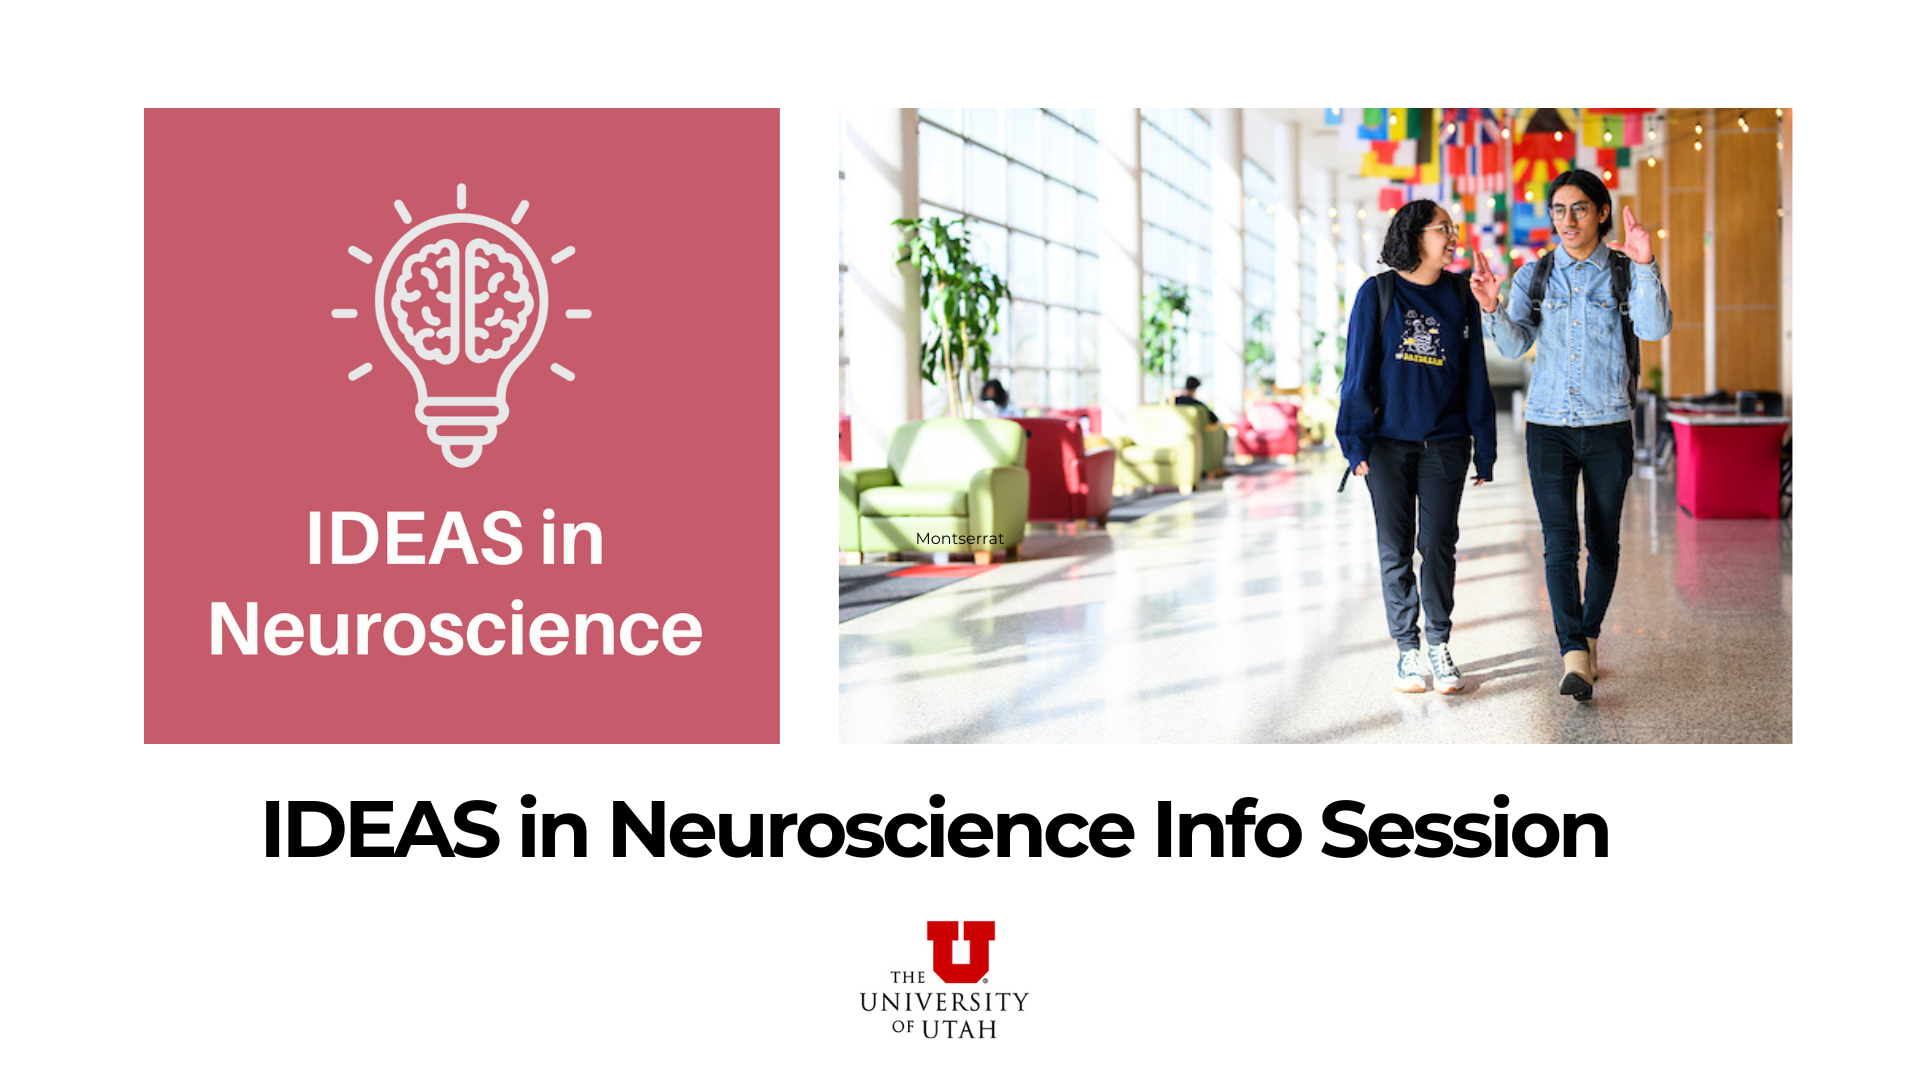 header for IDEAS in Neuroscience--red with white lettering